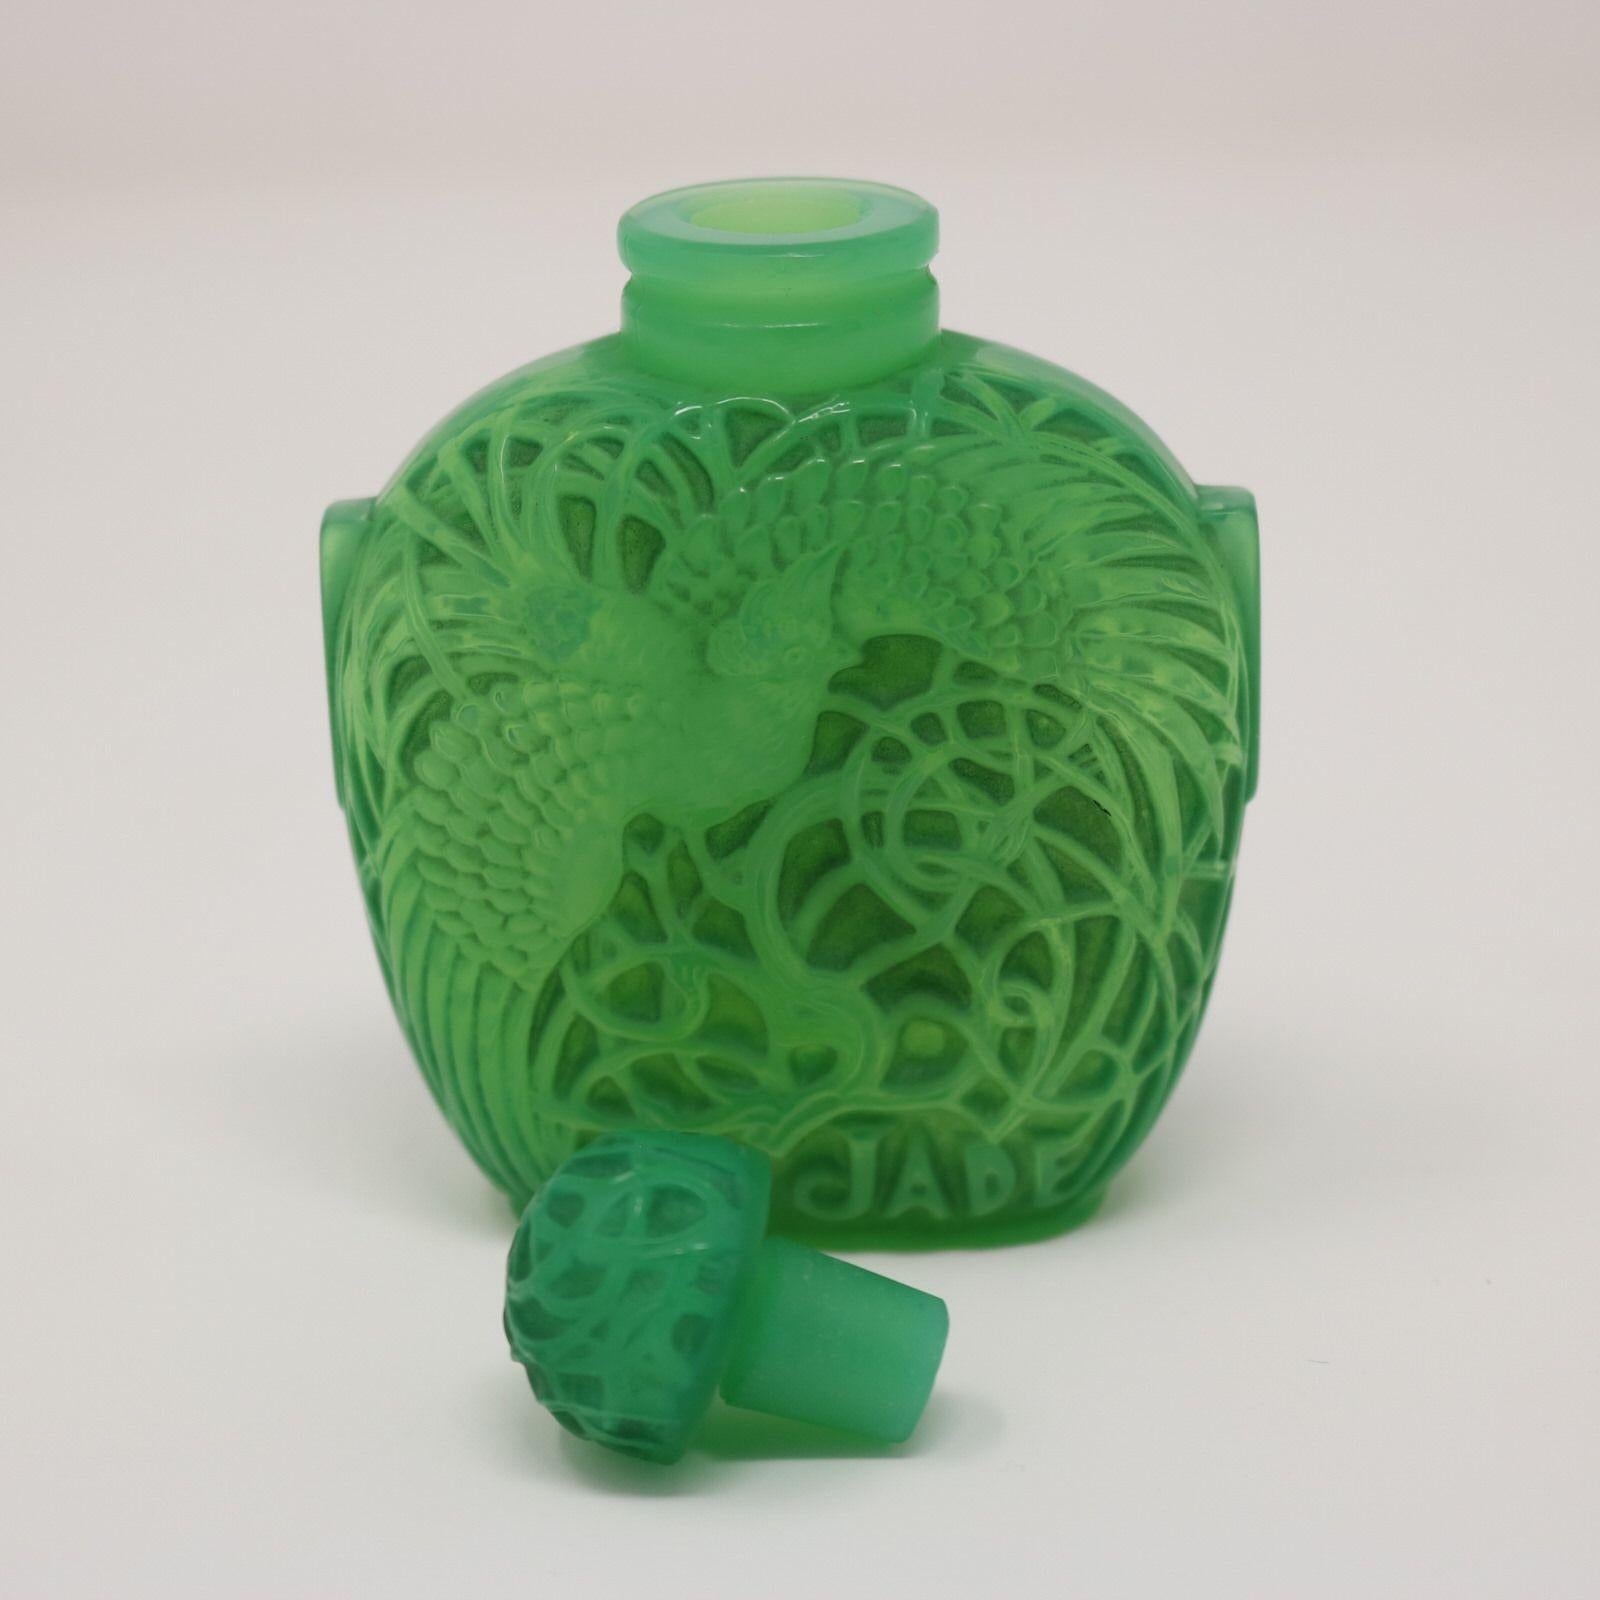 Early 20th Century Rene Lalique Green Glass 'Le Jade' Perfume Bottle